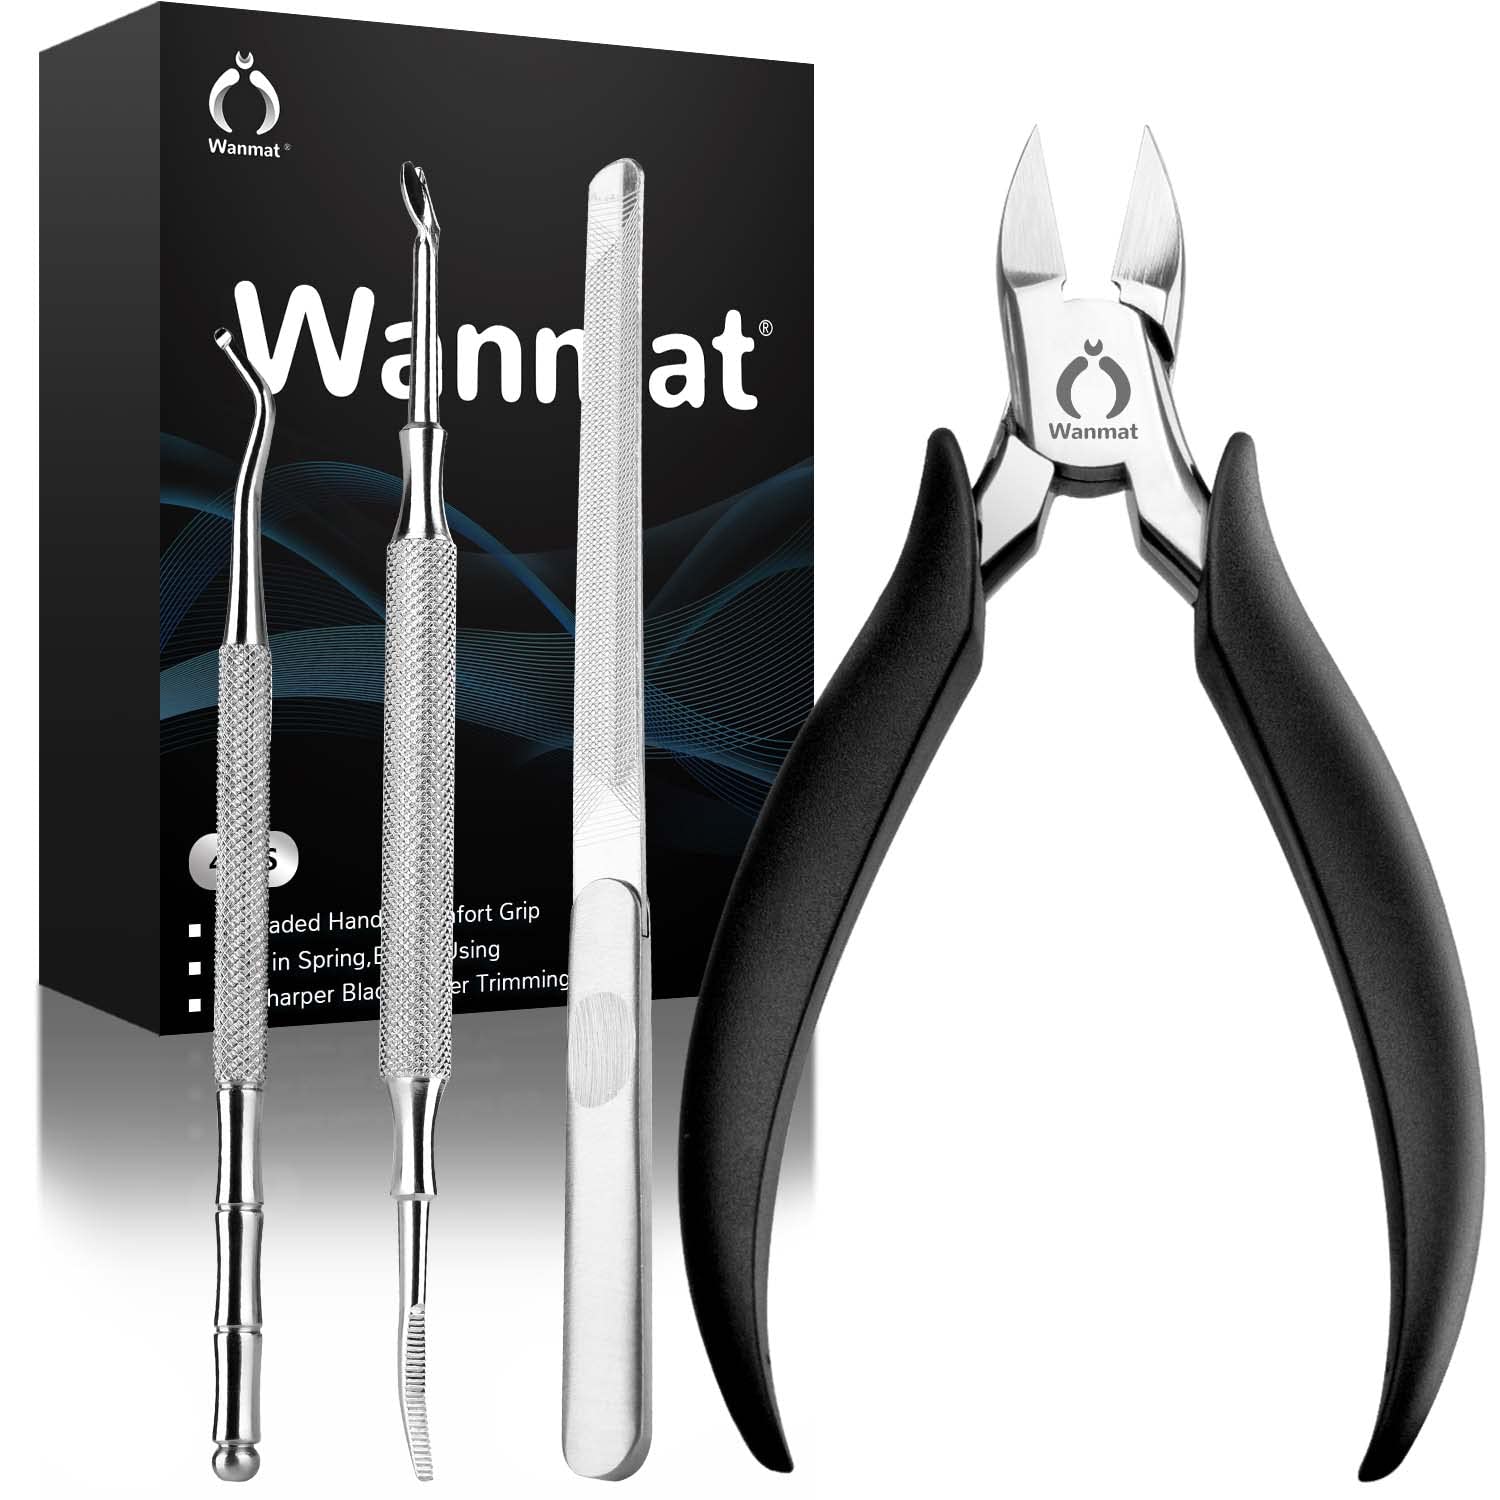 Toe Nail Clippers Podiatrist Toenail Clippers for Thick Nails for